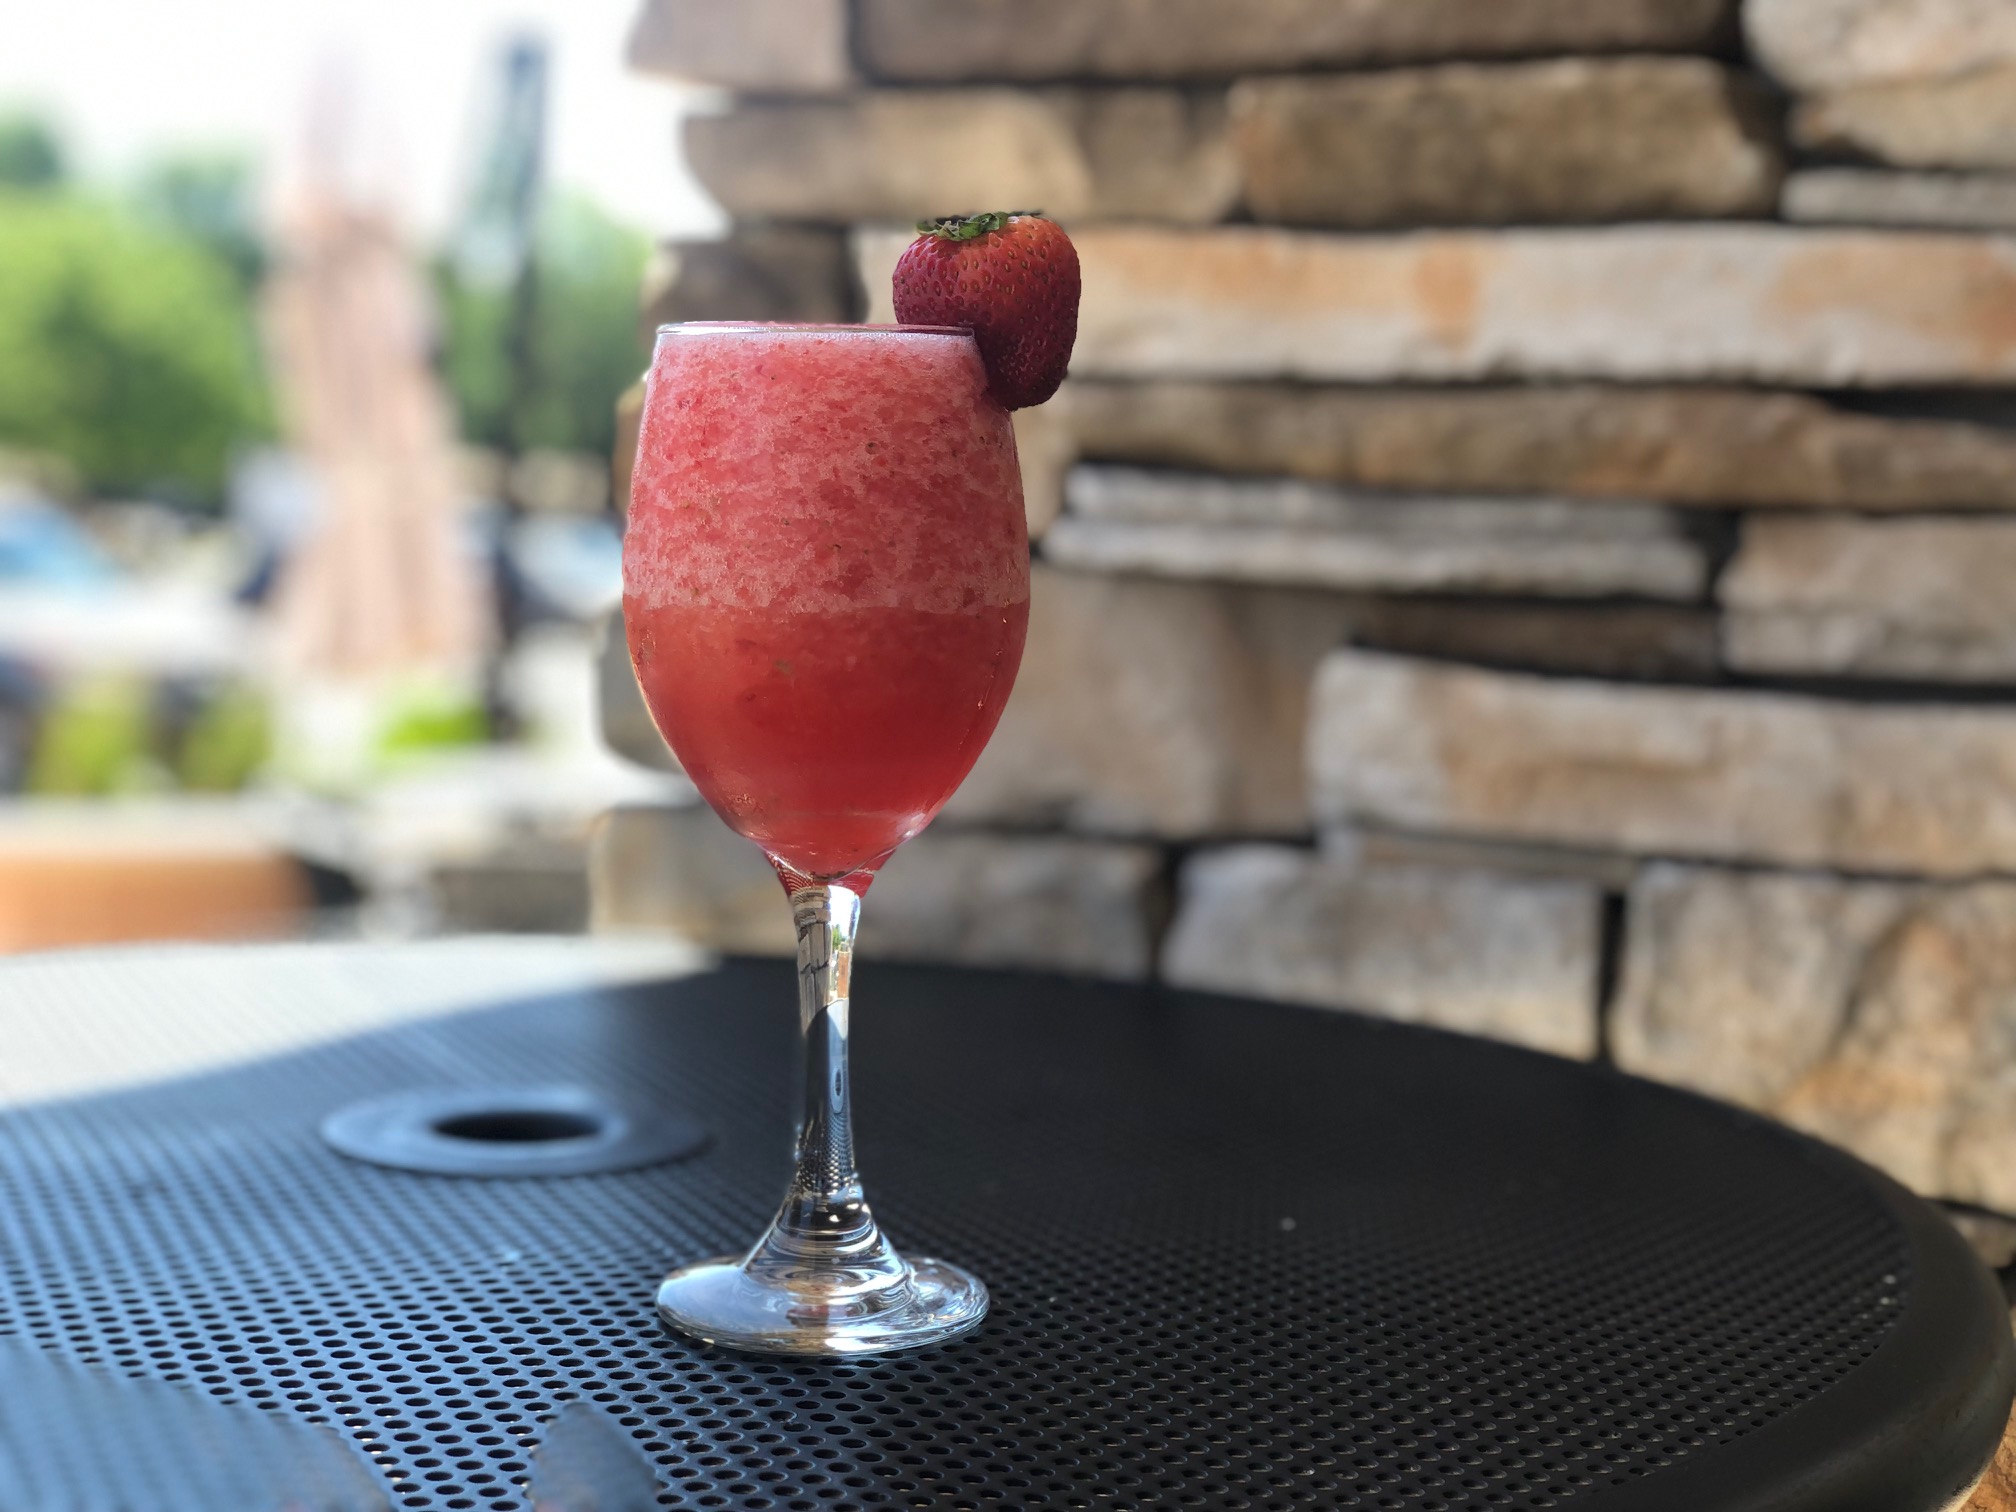 On a black patio table at Baxter's American Grill in Champaign, there is a wine glass filled with a strawberry iced drink with a full strawberry as a garnish on the right side. Photo by Alyssa Buckley.